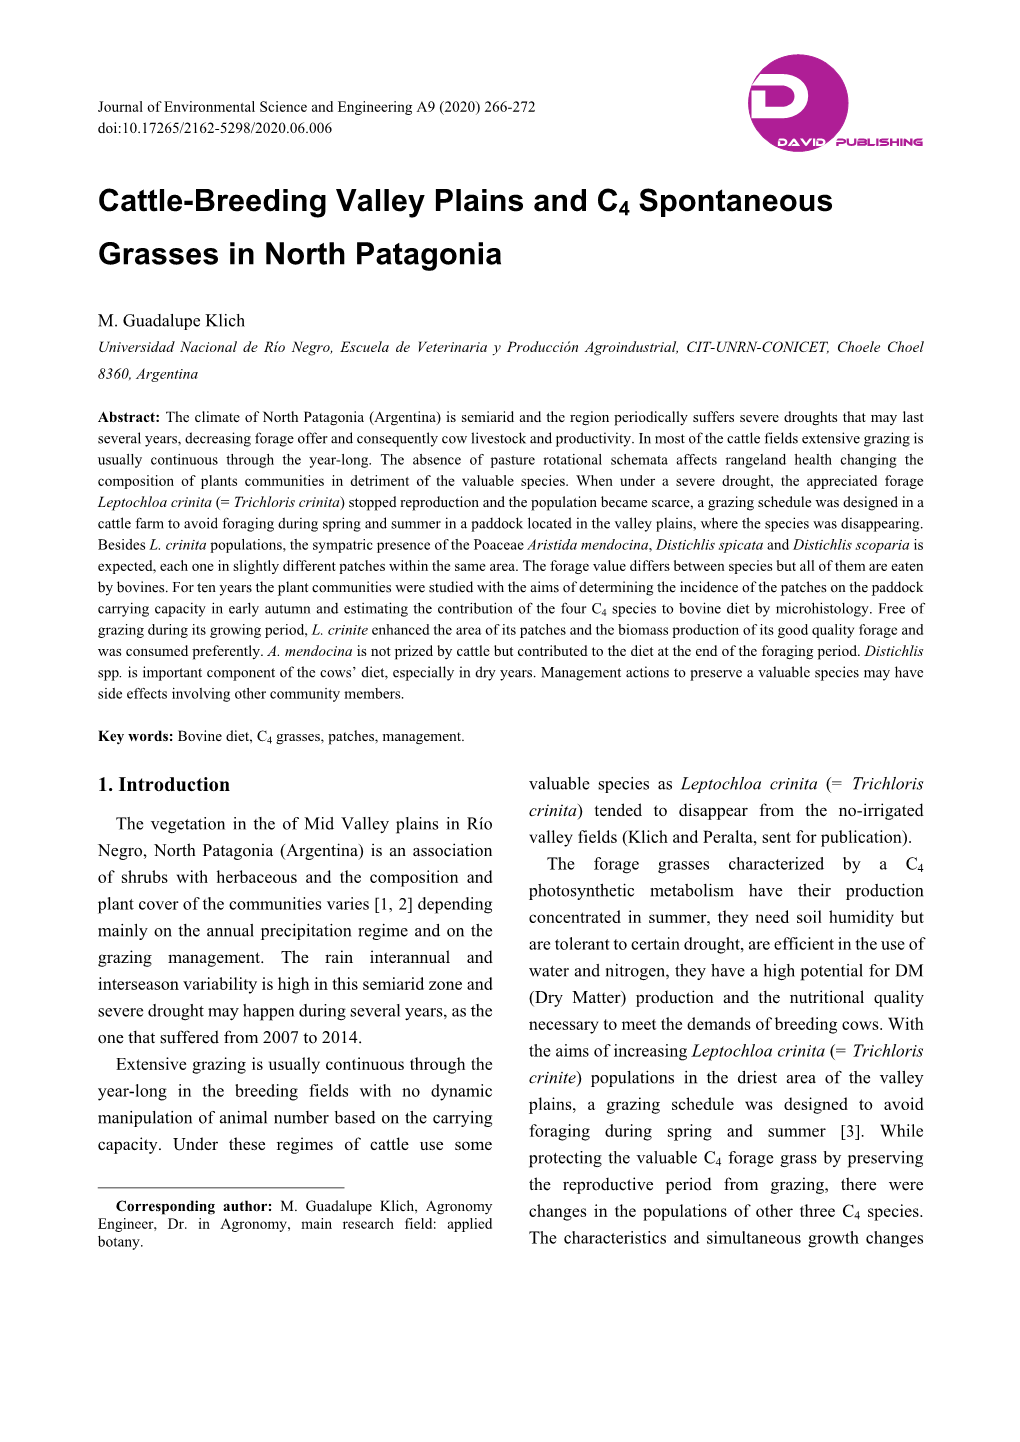 Cattle-Breeding Valley Plains and C4 Spontaneous Grasses in North Patagonia